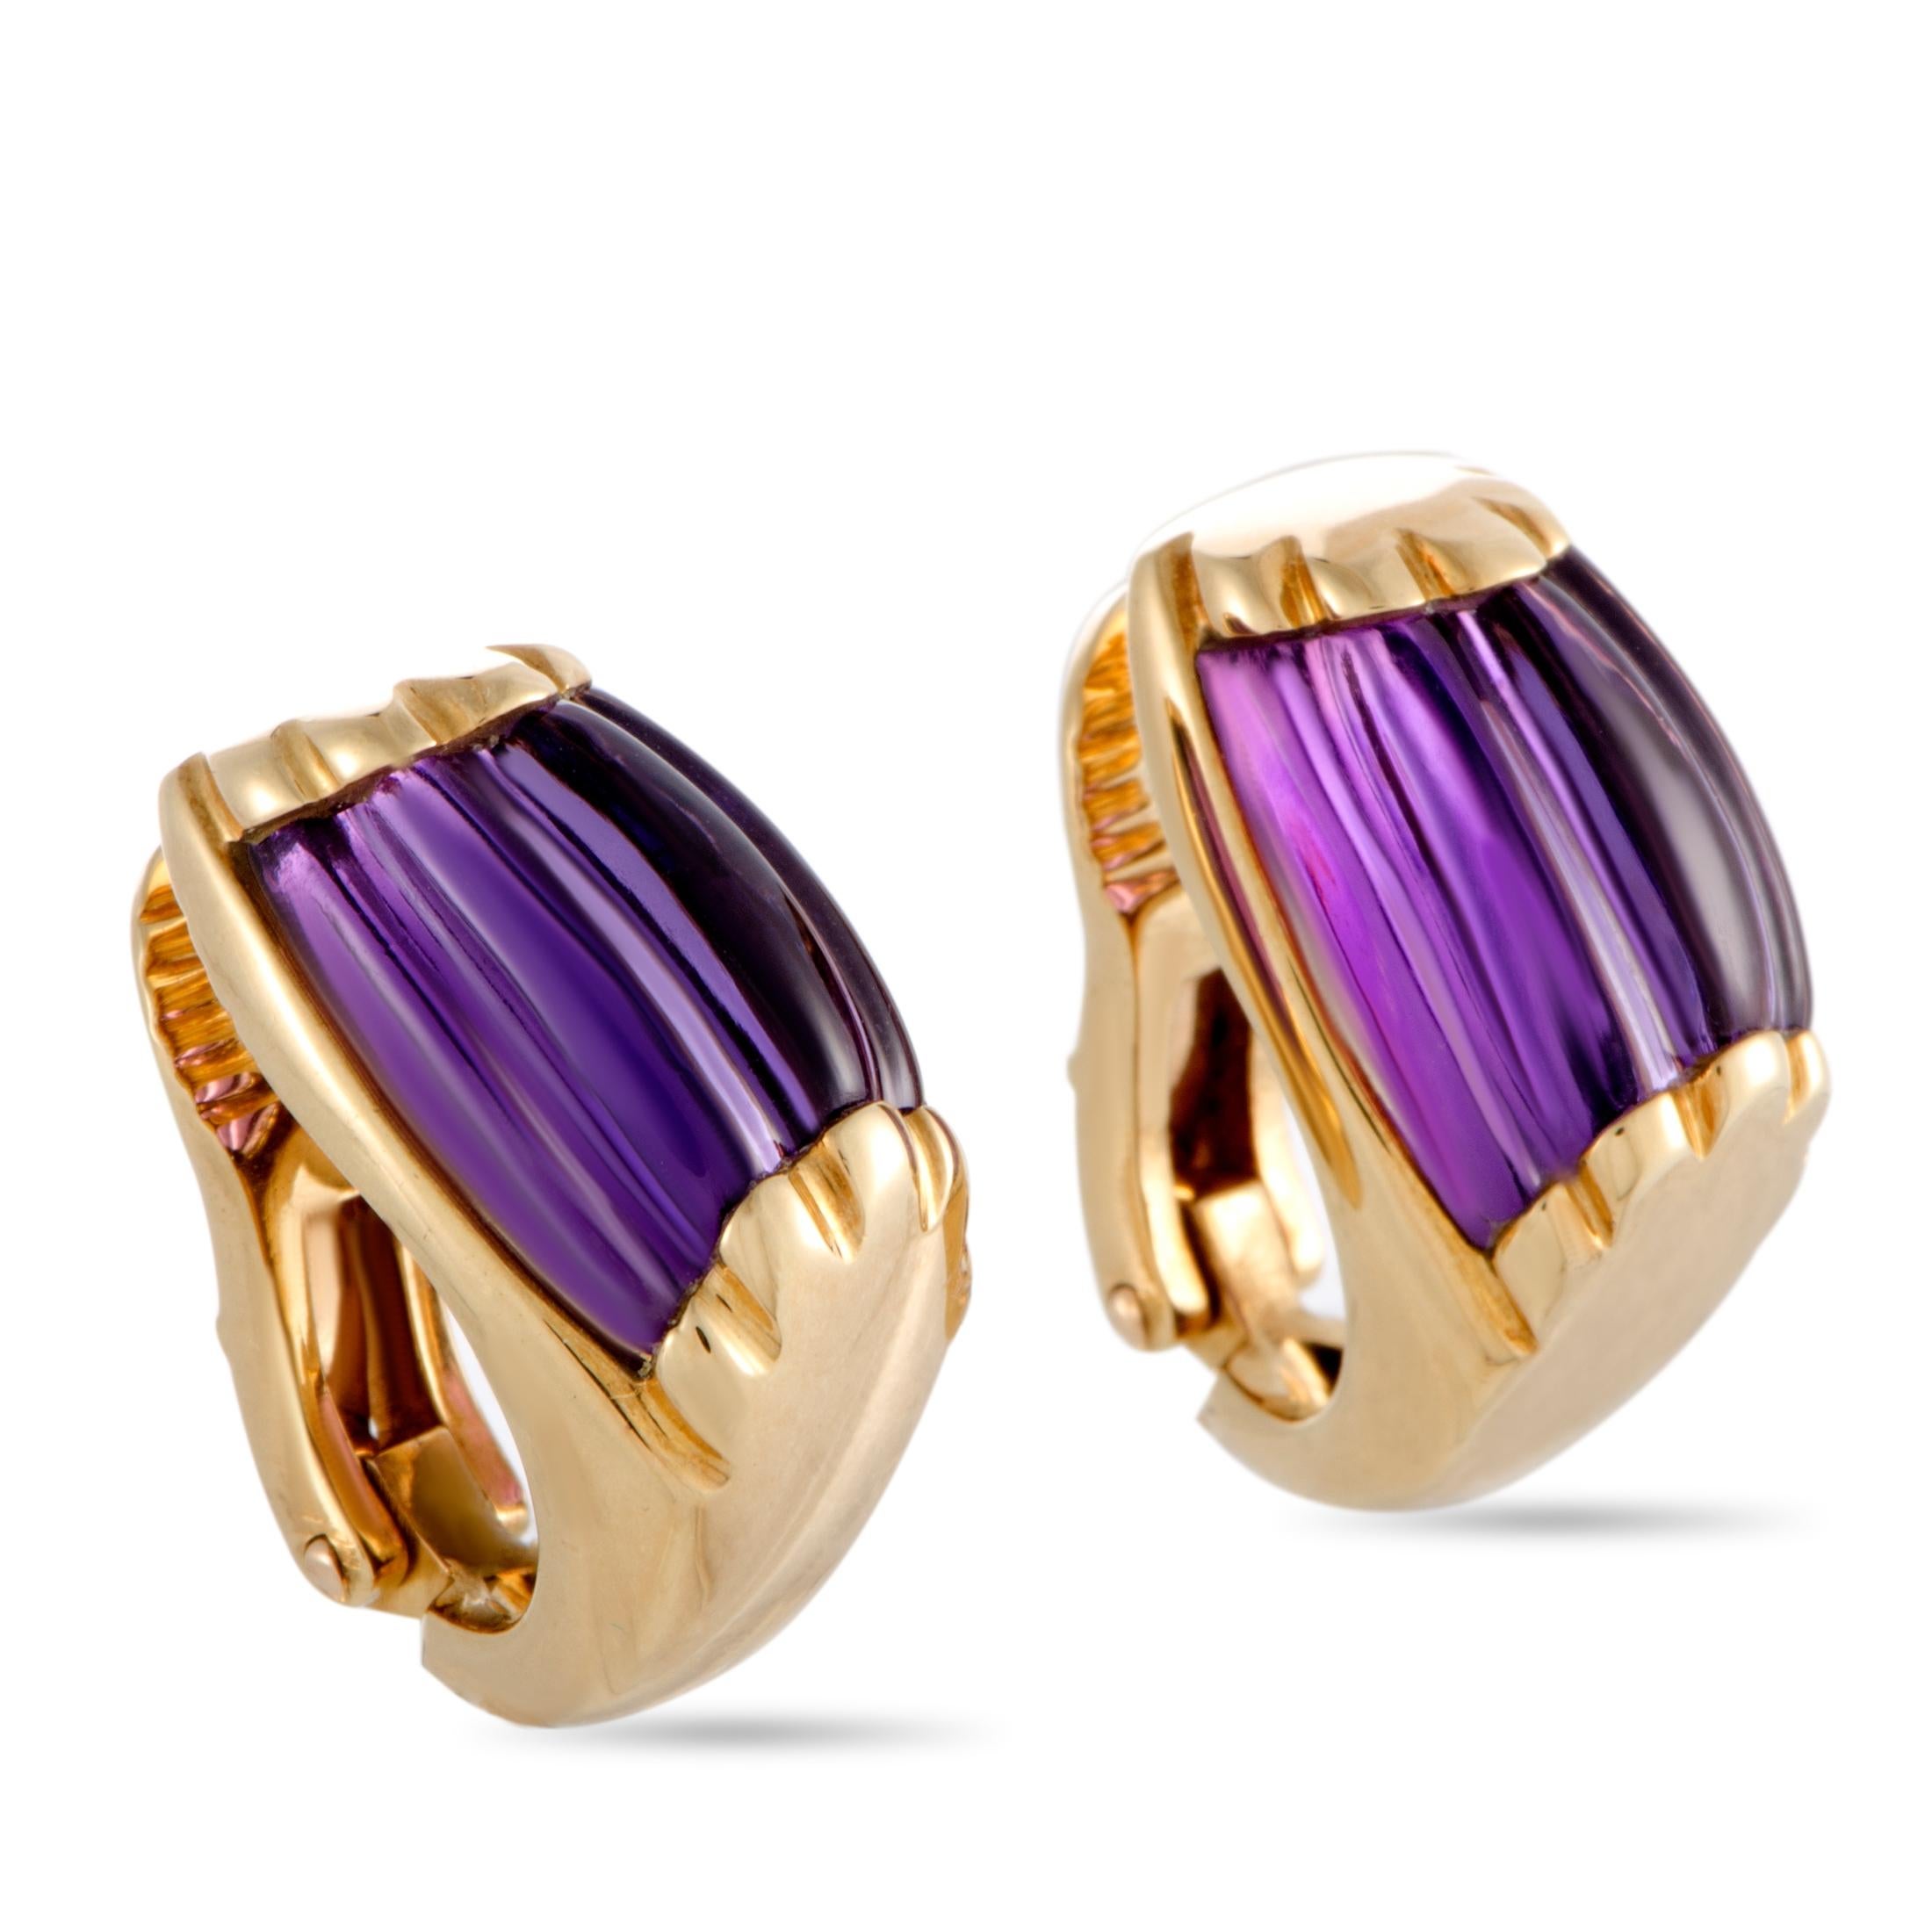 Add a fashionable twist to your ensembles with these compelling earrings that are designed by Bvlgari for the exceptional “Tronchetto” collection. The earrings are made of attractive 18K yellow gold and decorated with captivating amethysts.
